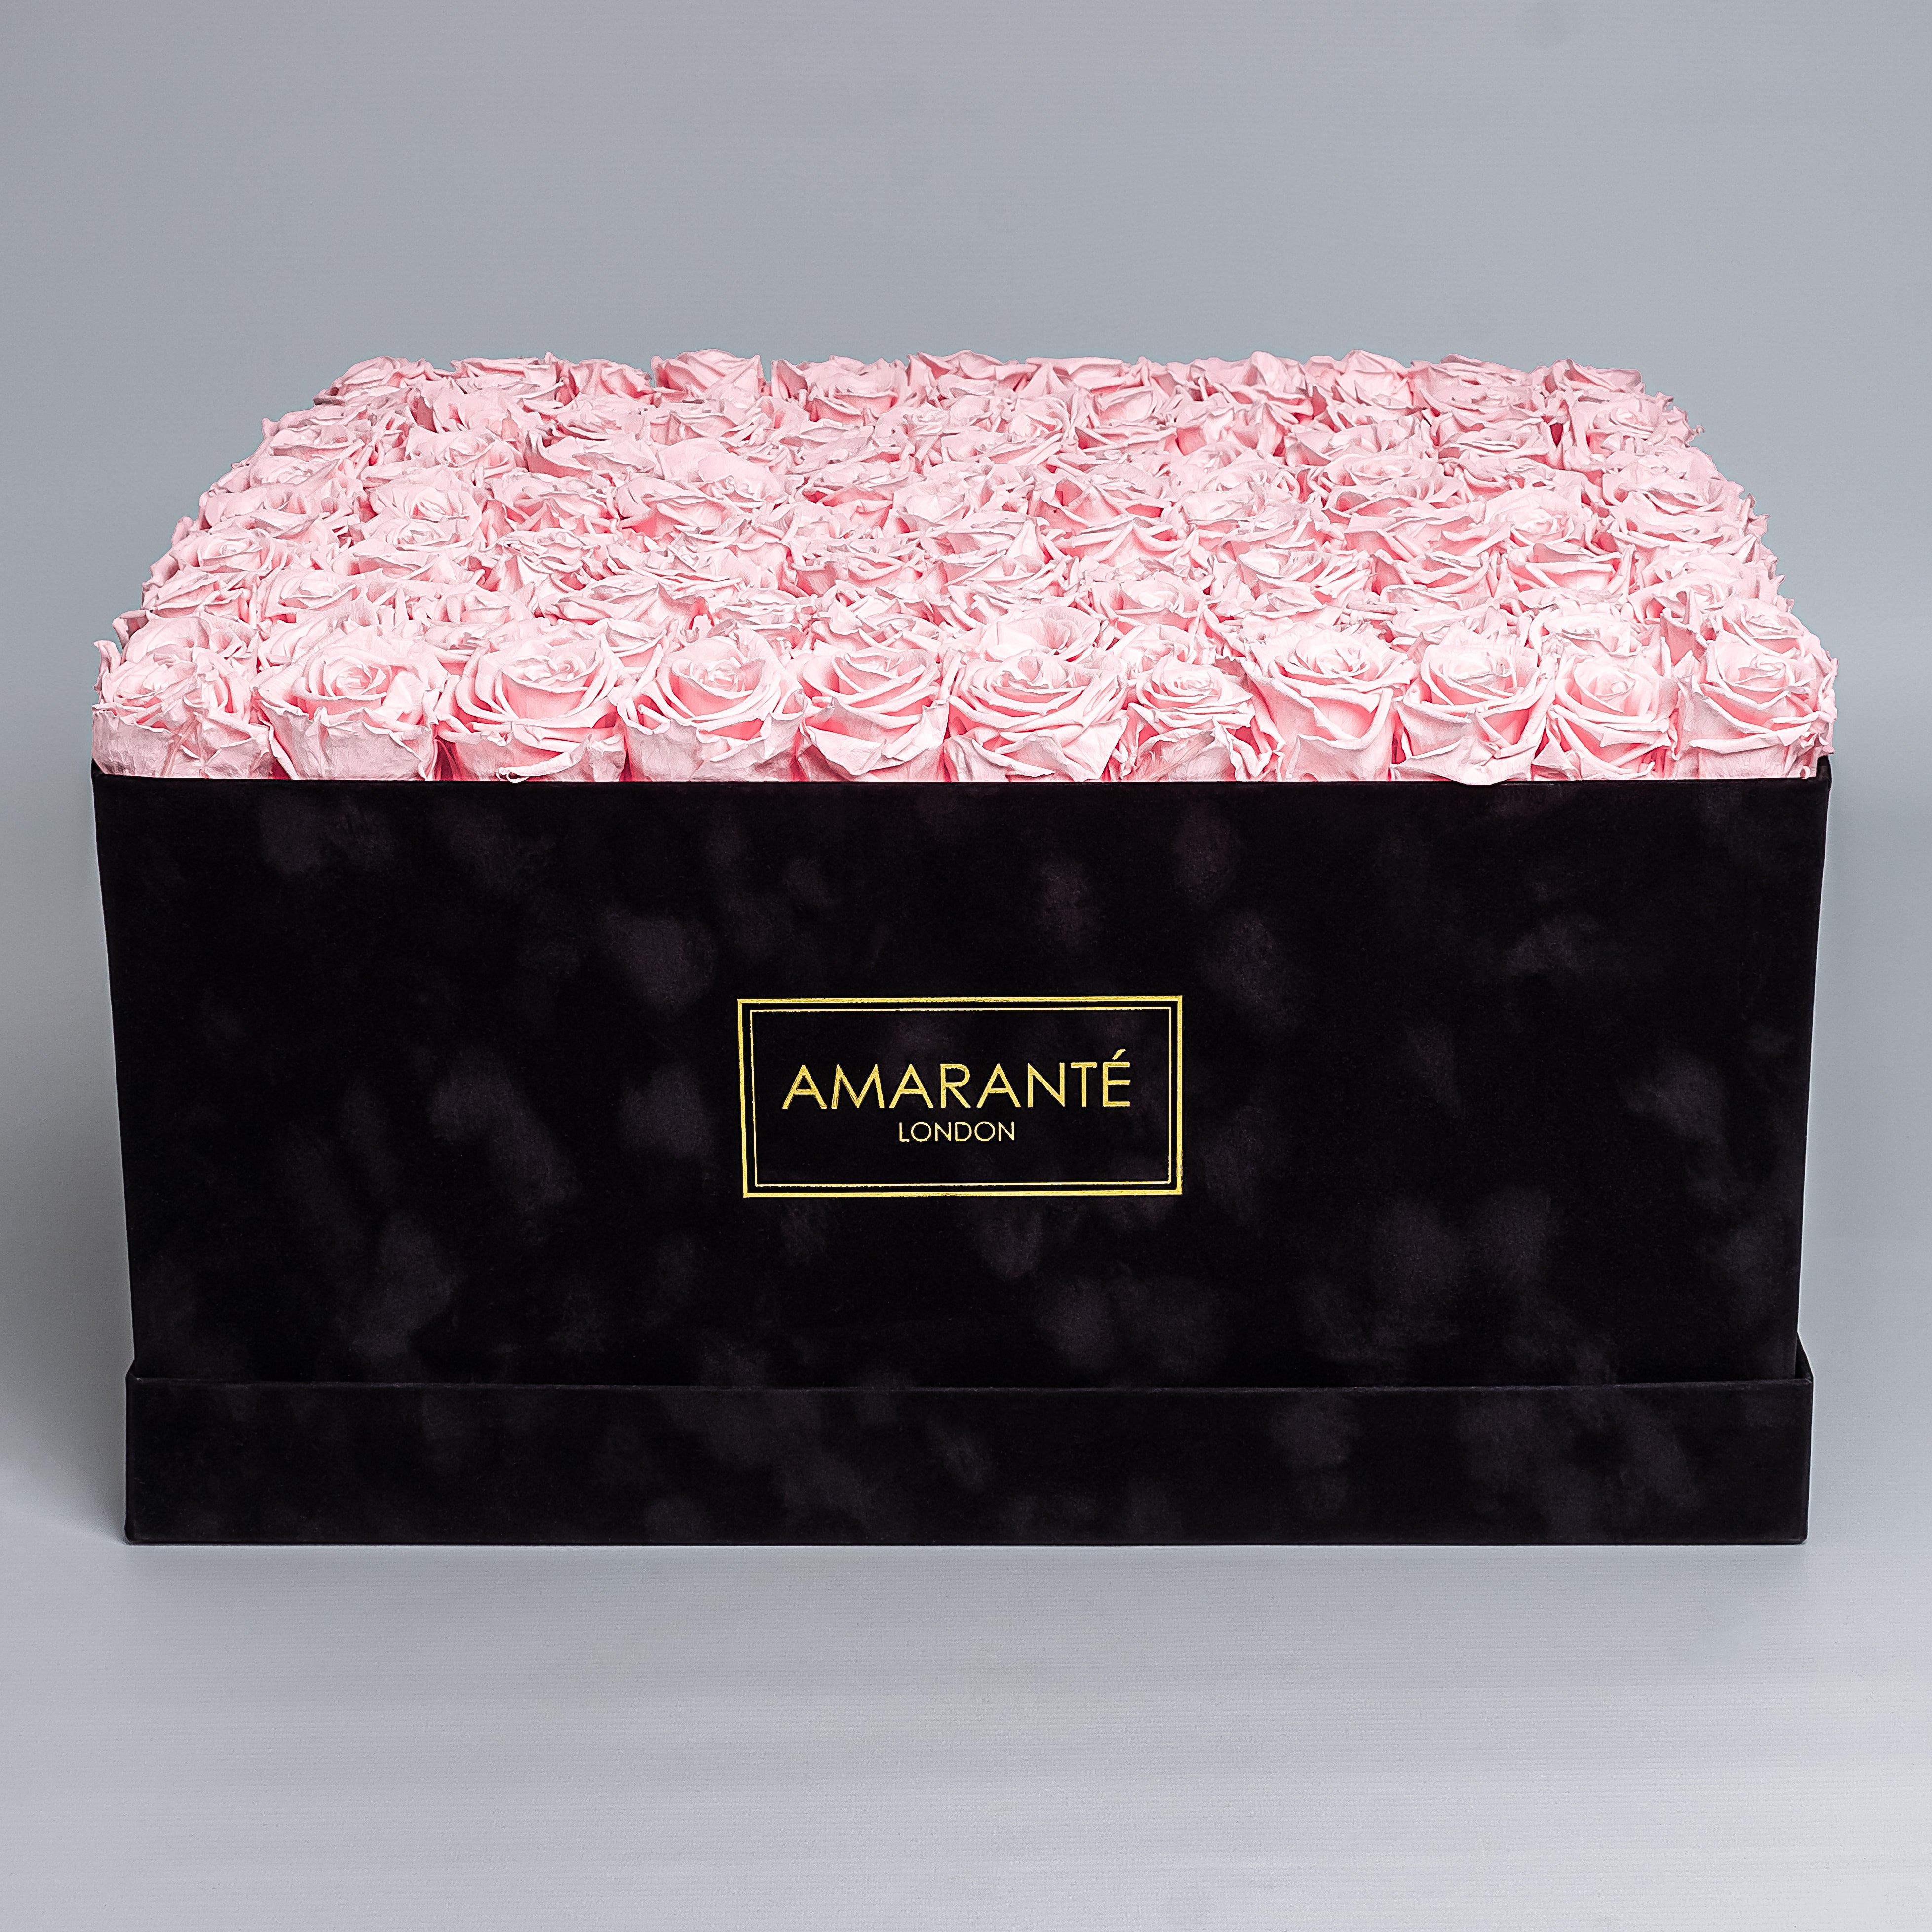 Elegant super deluxe black square hatbox containing 150 light-pink forever roses, epitomising timeless romance. Free UK delivery. Each rose 2-3 inches, box size  20"x20".